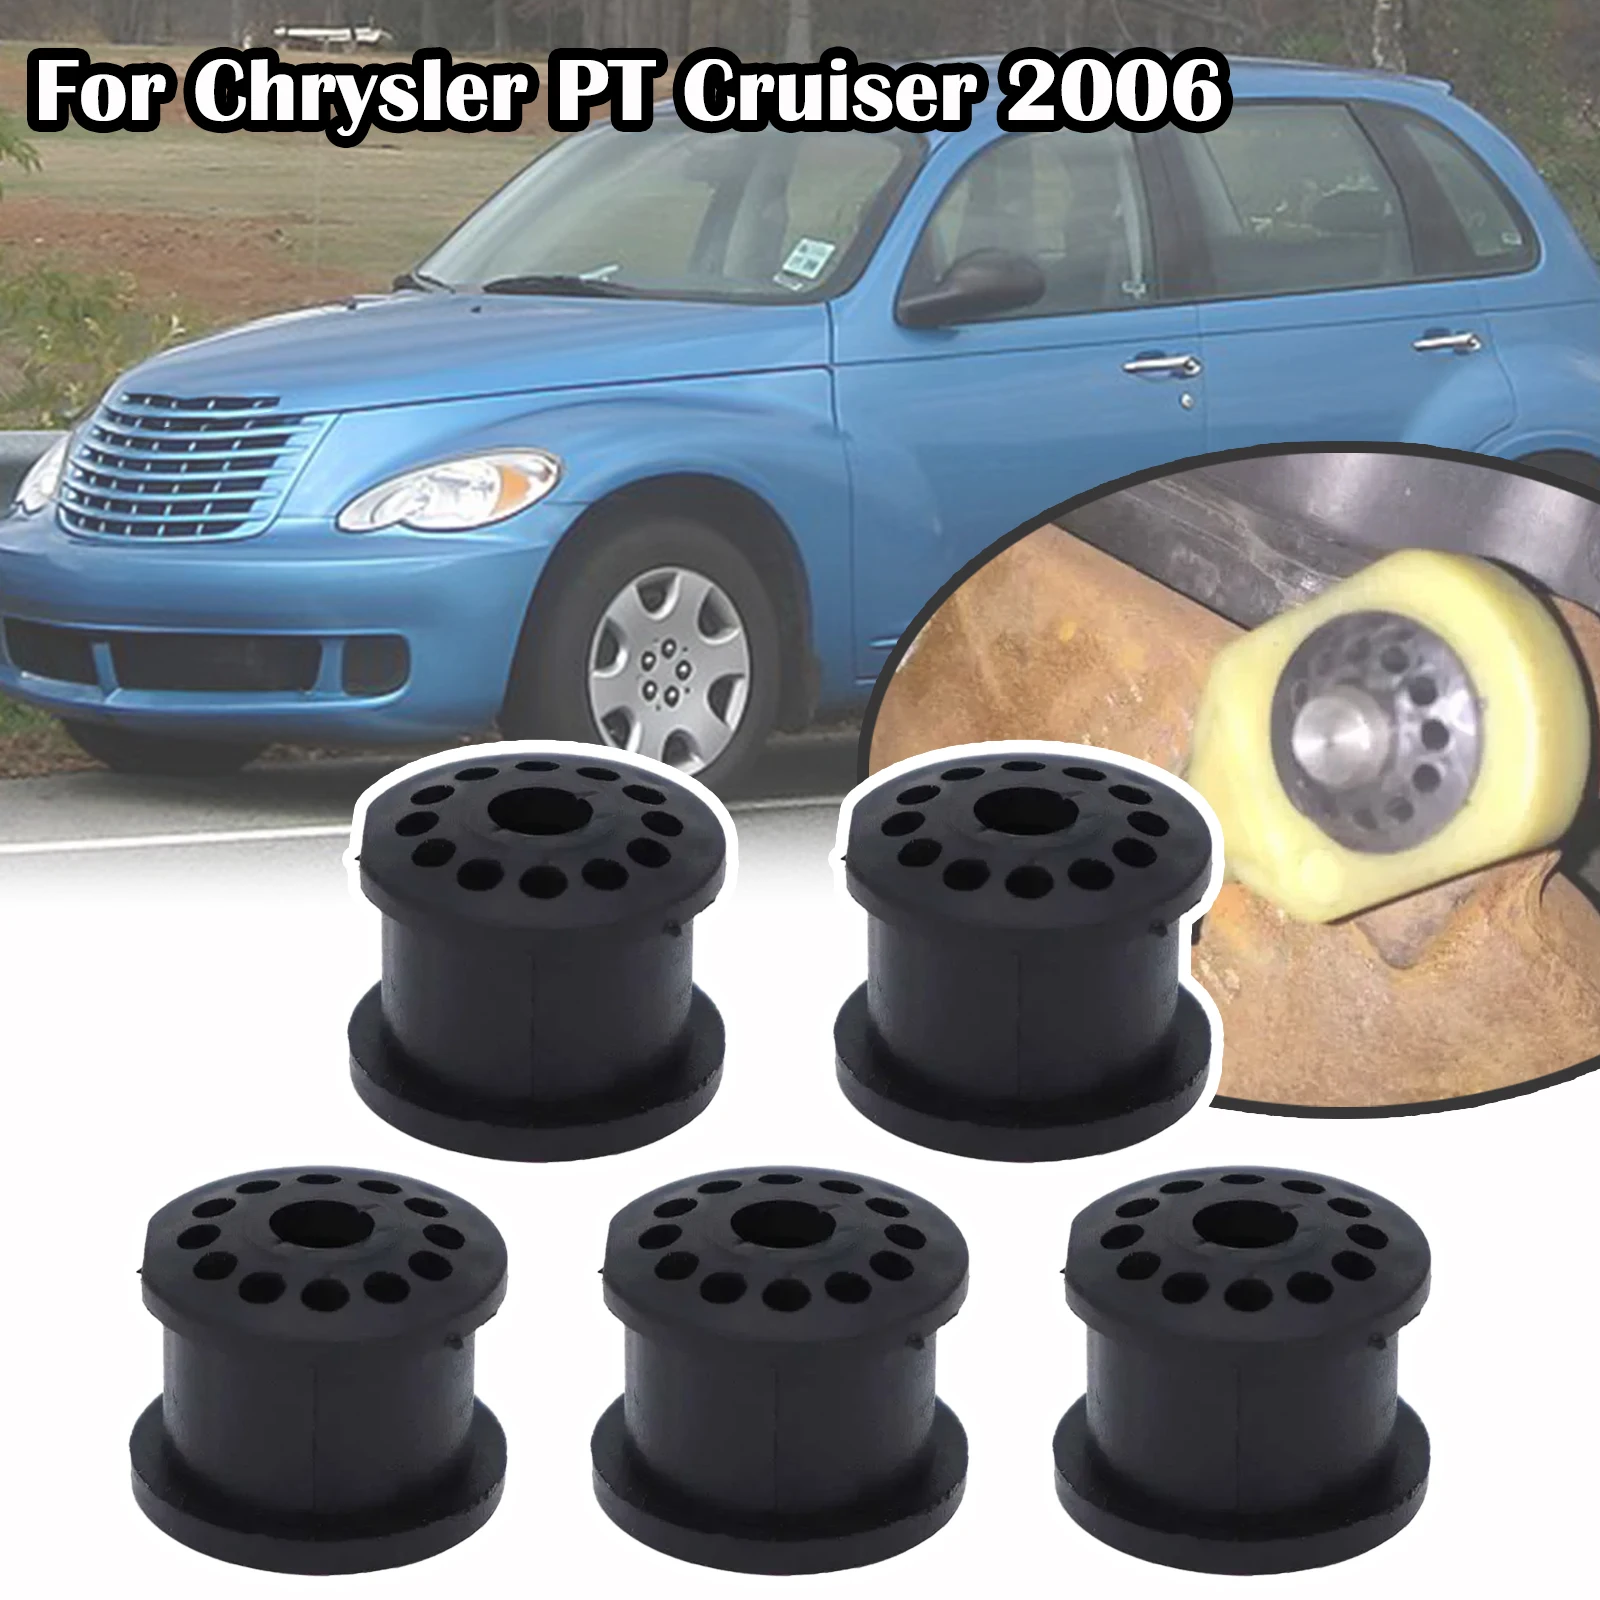 

5X For Chrysler PT Cruiser 2006 Gearbox Cable Linkage Rubber Bushing MT 5Speed Shift Lever Assembly Repair Kit Replacement Parts